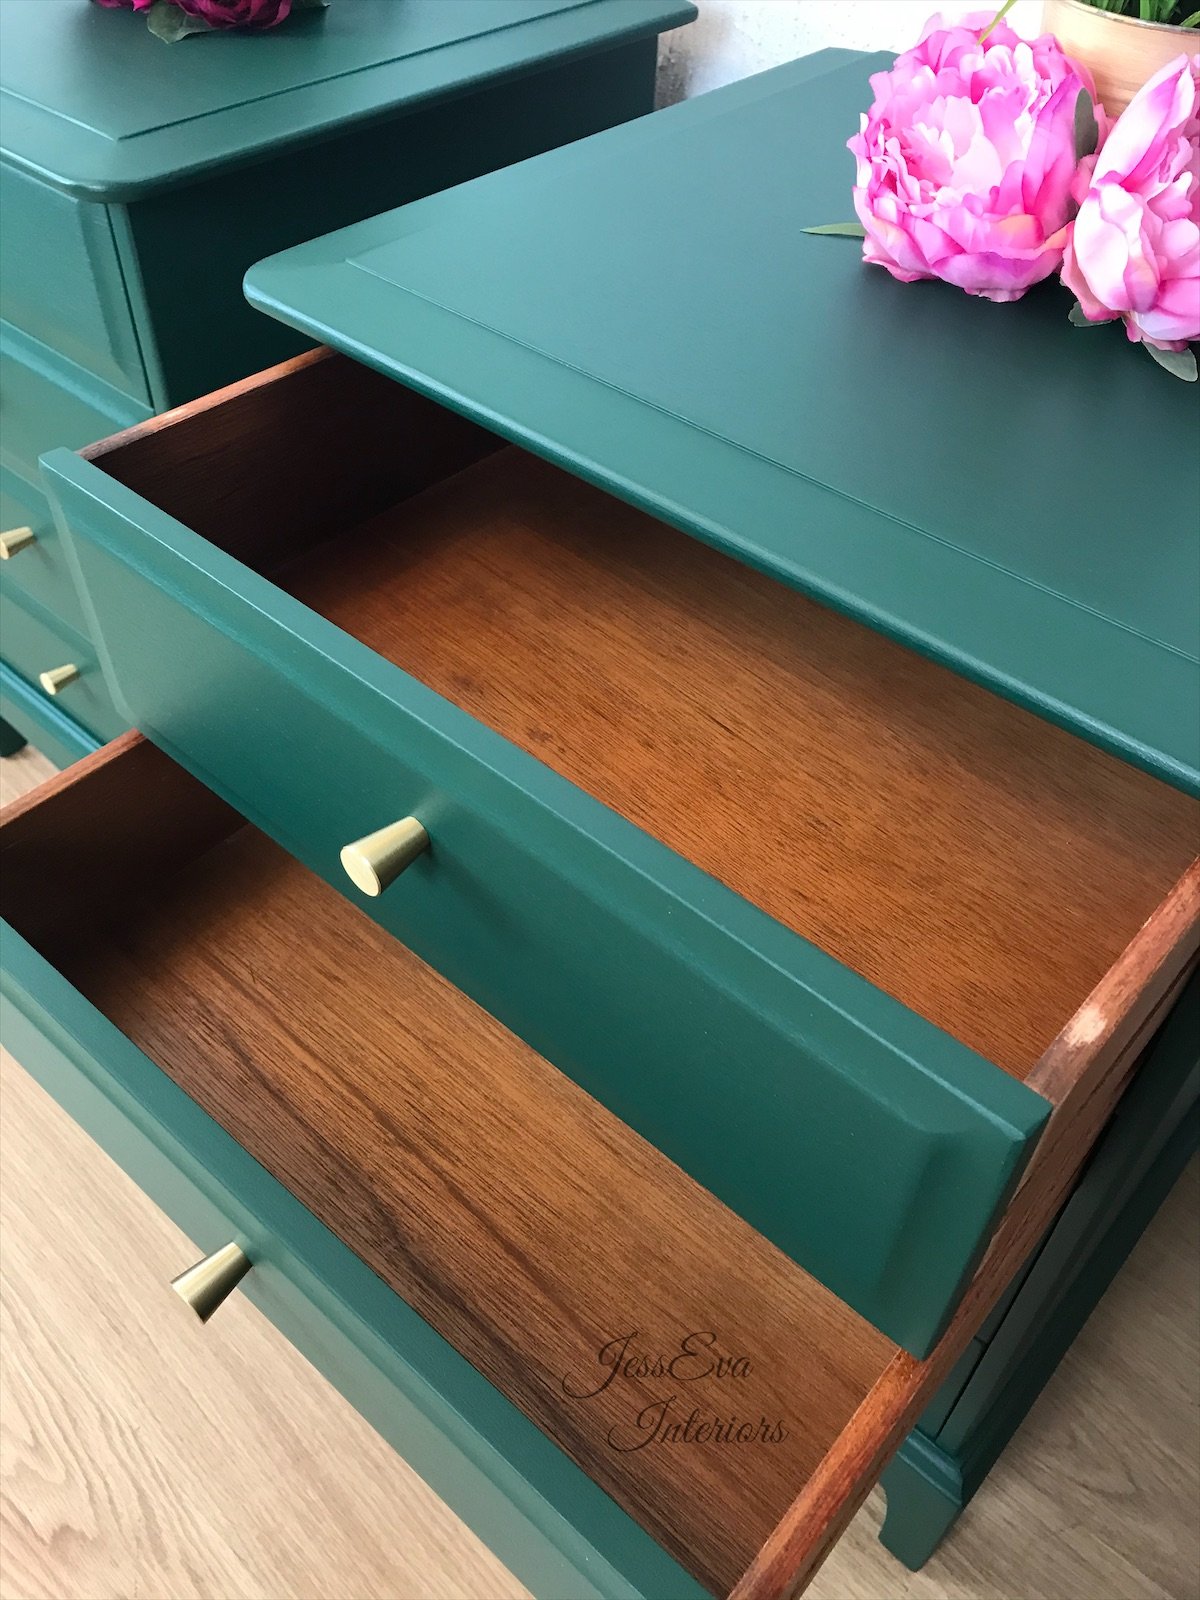 Stag Minstrel Bedside Tables / Stag Bedside Cabinets / Chest of Drawers painted in Emerald Green